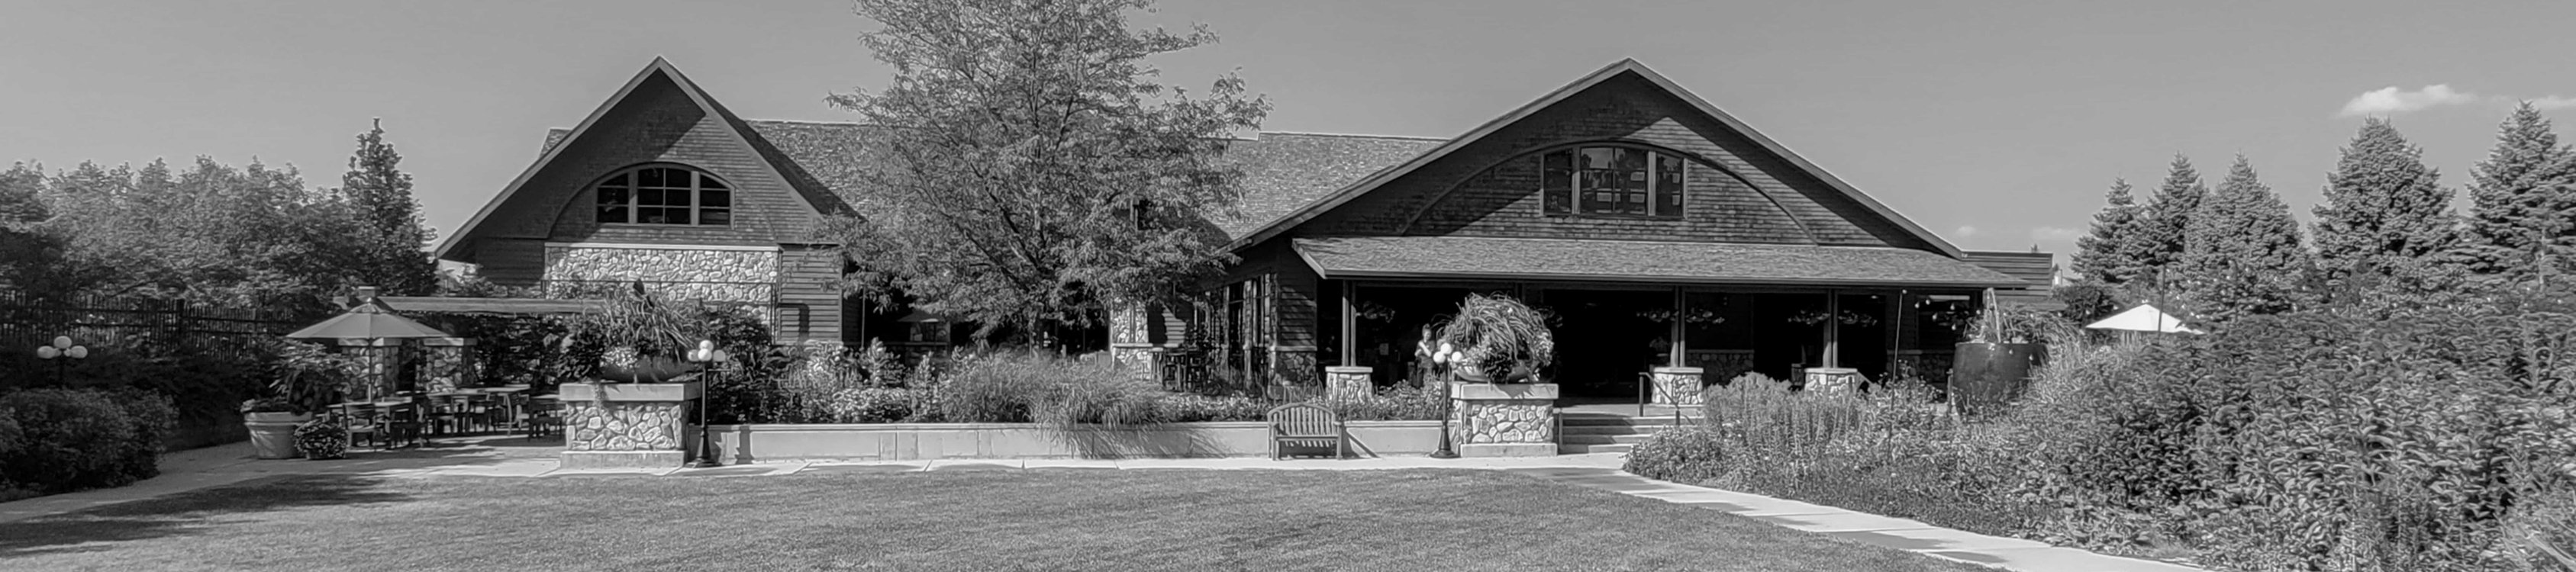 Greyscale picture of the main building at McCrory Garden